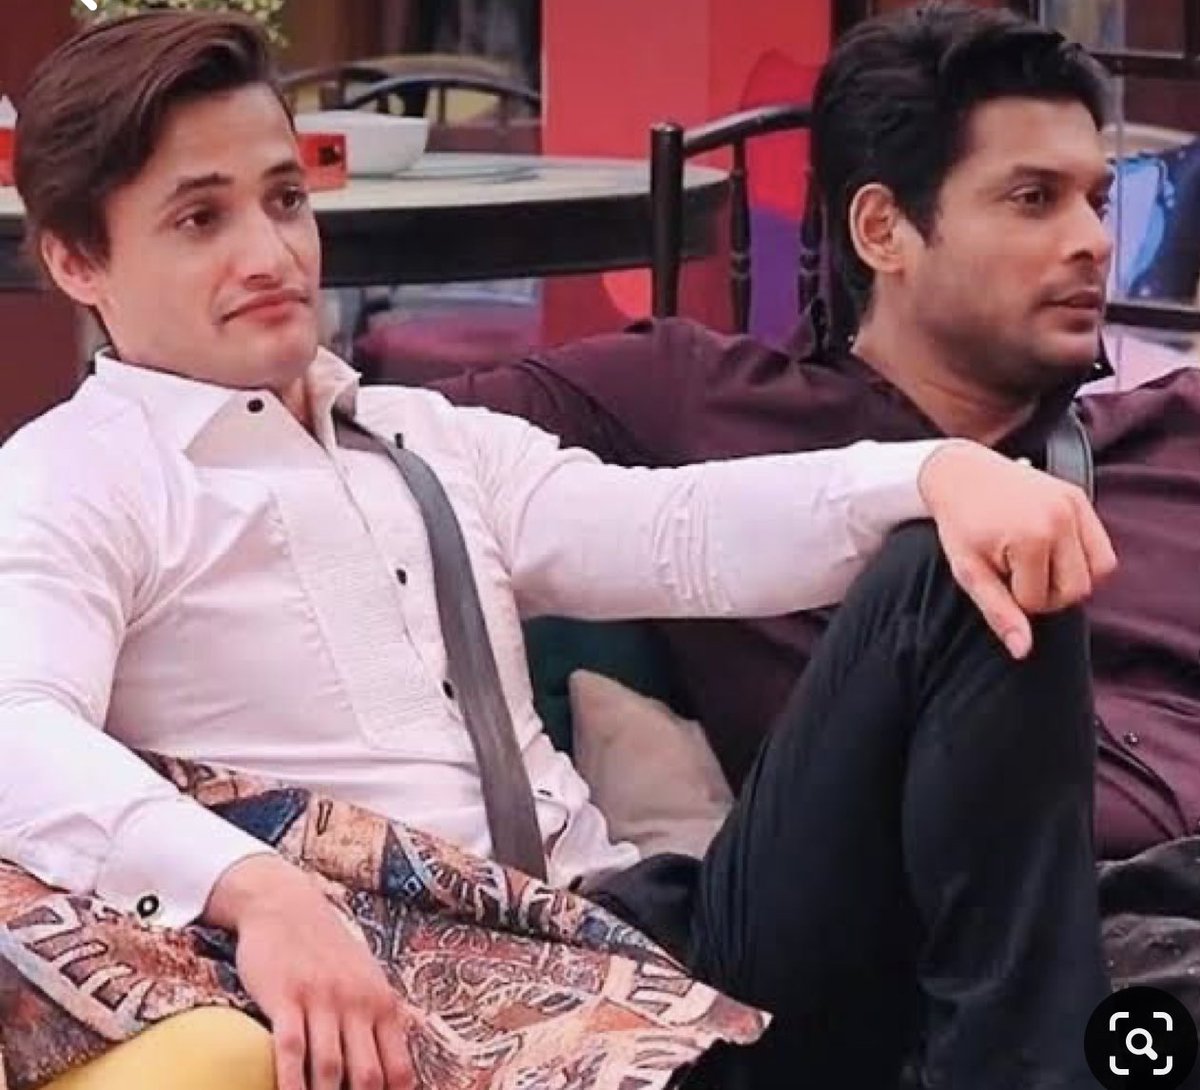 Am i the only one who’s asim’s fan 
But also loves 
Sidsim and sidnaz
And their trio 🥺🫶♥️

#bb13
#AsimRiaz 
#SidharthShukla